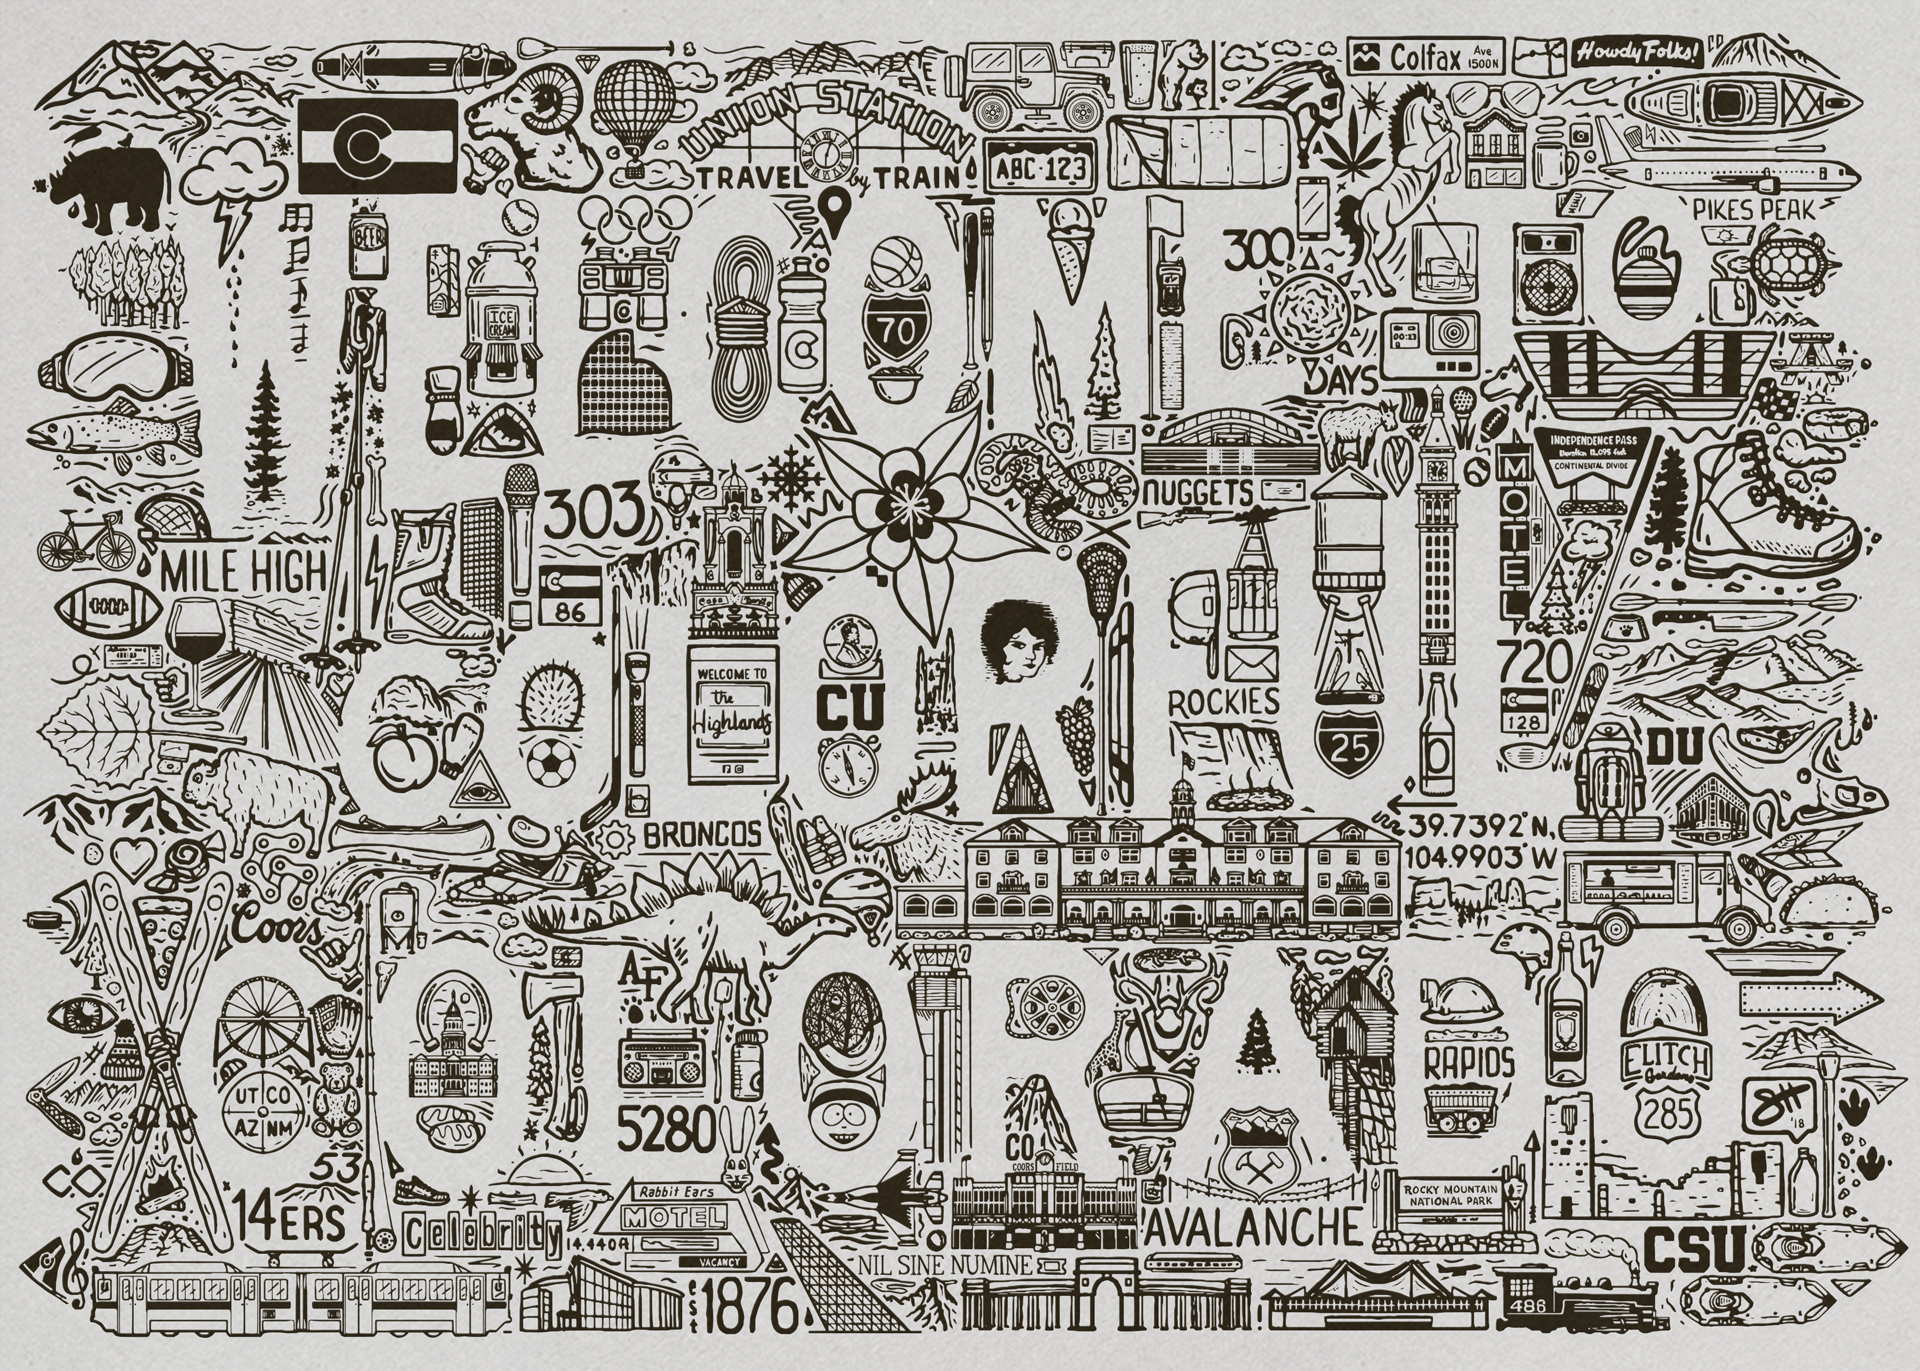 Welcome to Colorful Colorado Iconoflage-Full Piece